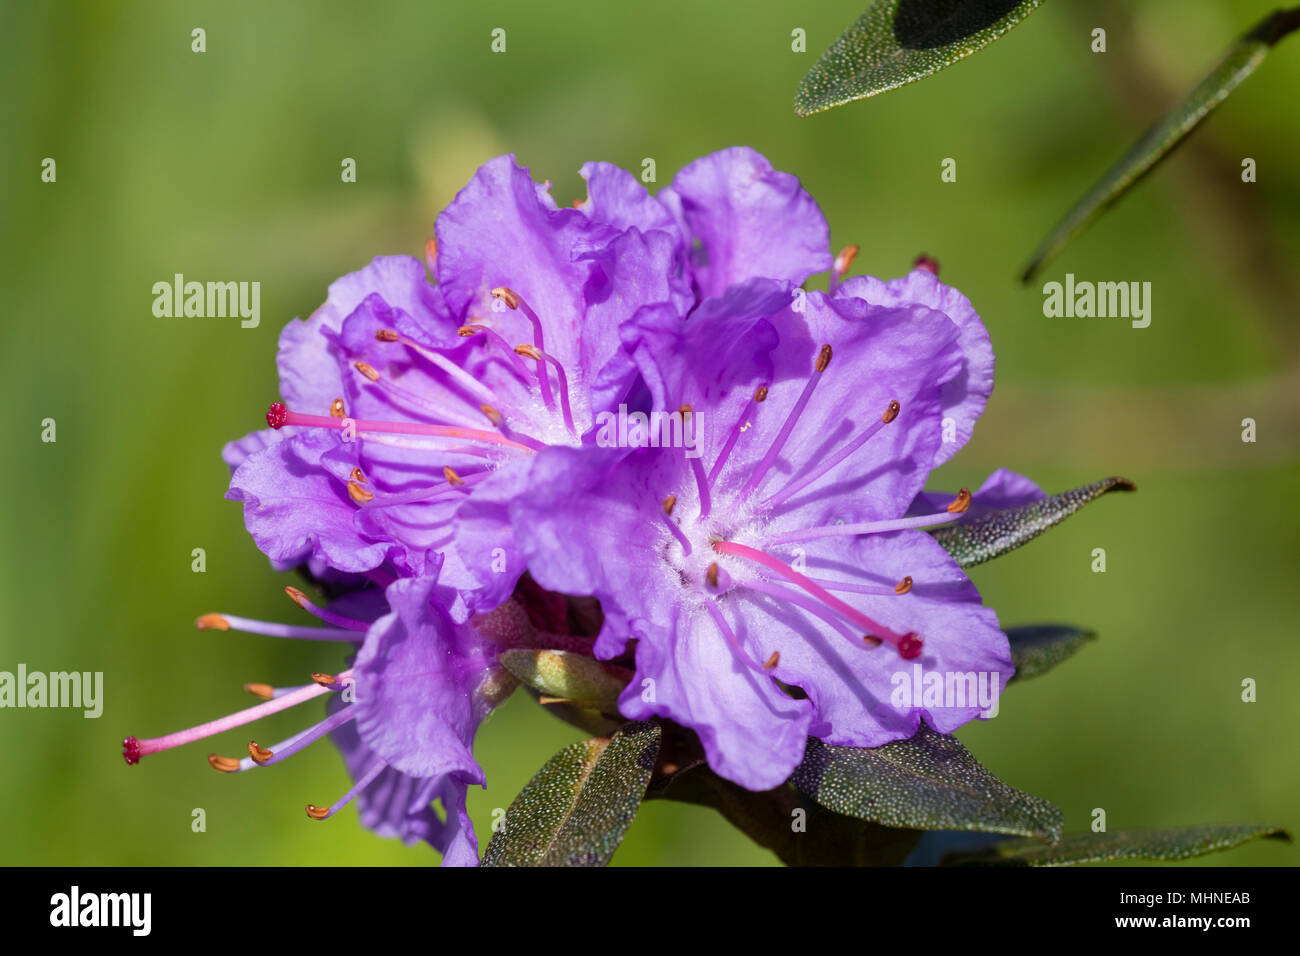 Spring flowers of the compact dwarf shrub, Rhododendron 'Ramapo' Stock Photo